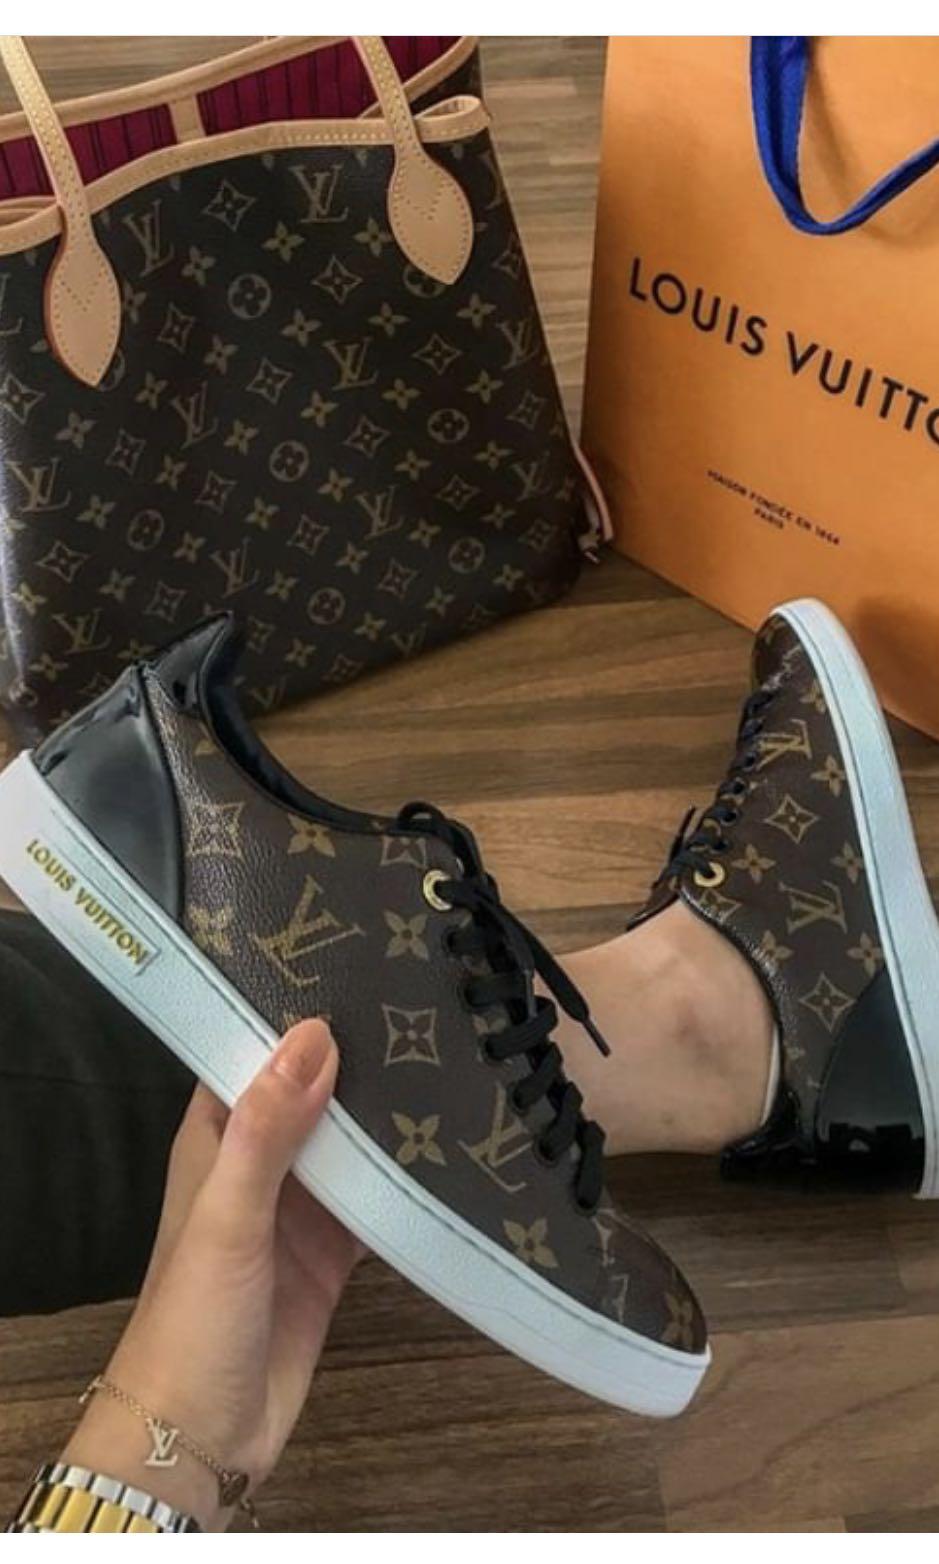 Shop Louis Vuitton Frontrow Trainer (SNEAKER FRONTROW, 1A1F4Q 1A1F4R,  1A1F4K 1A1F4M 1A1F4N 1A1F4O, 1A1F4C 1A1F4E 1A1F4G 1A1F4I ) by Mikrie